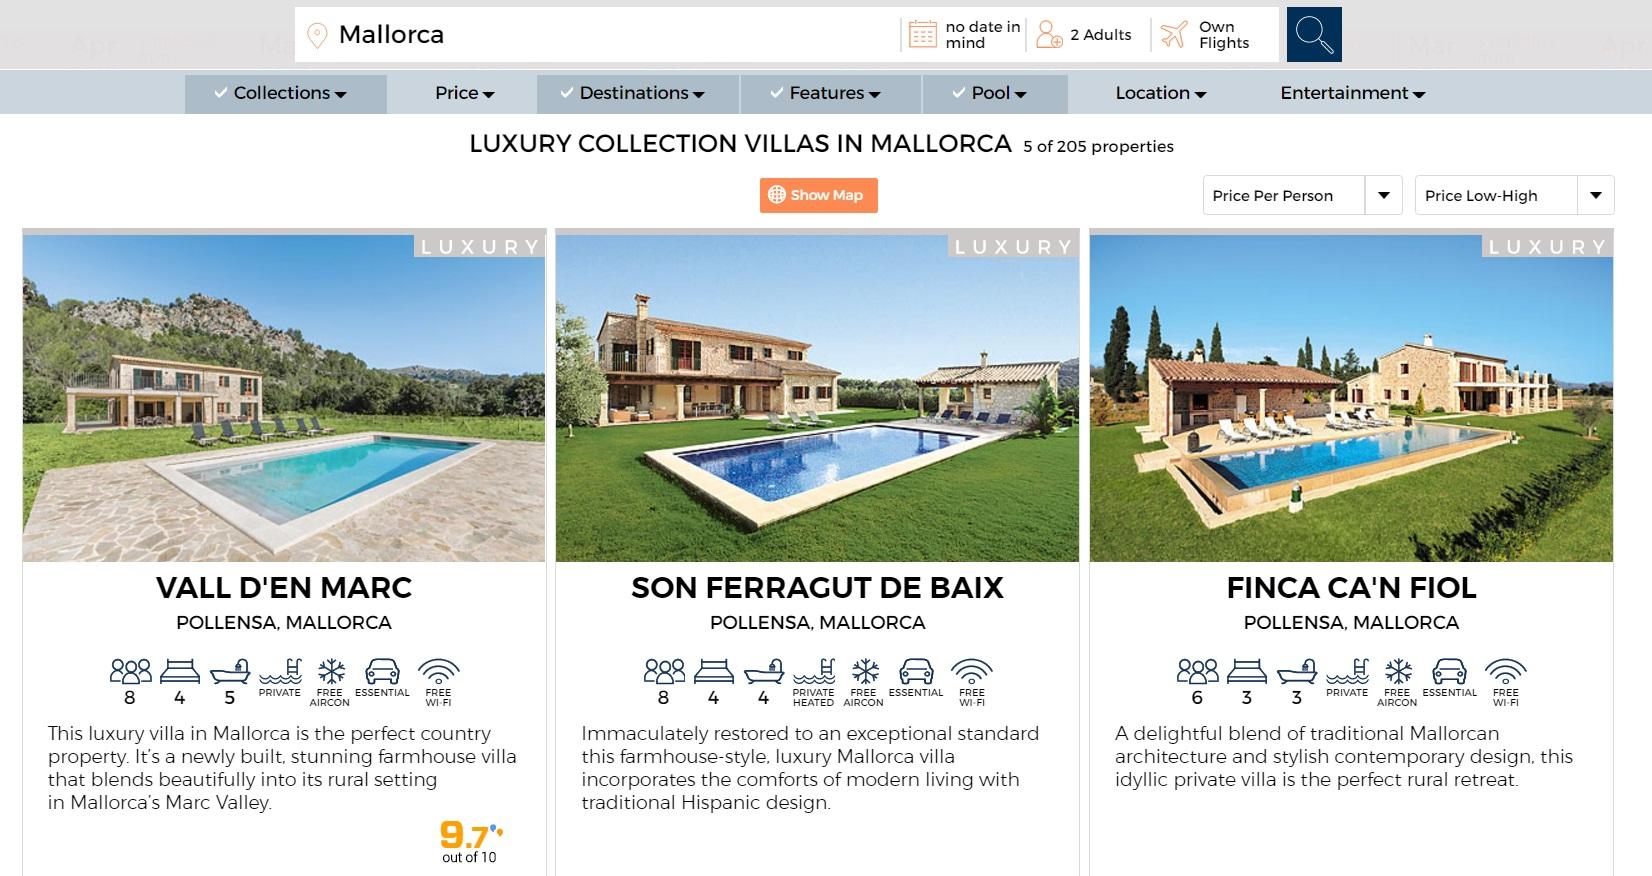 Travel Planning - Mallorca Luxury Villas - Lady From A Tramp